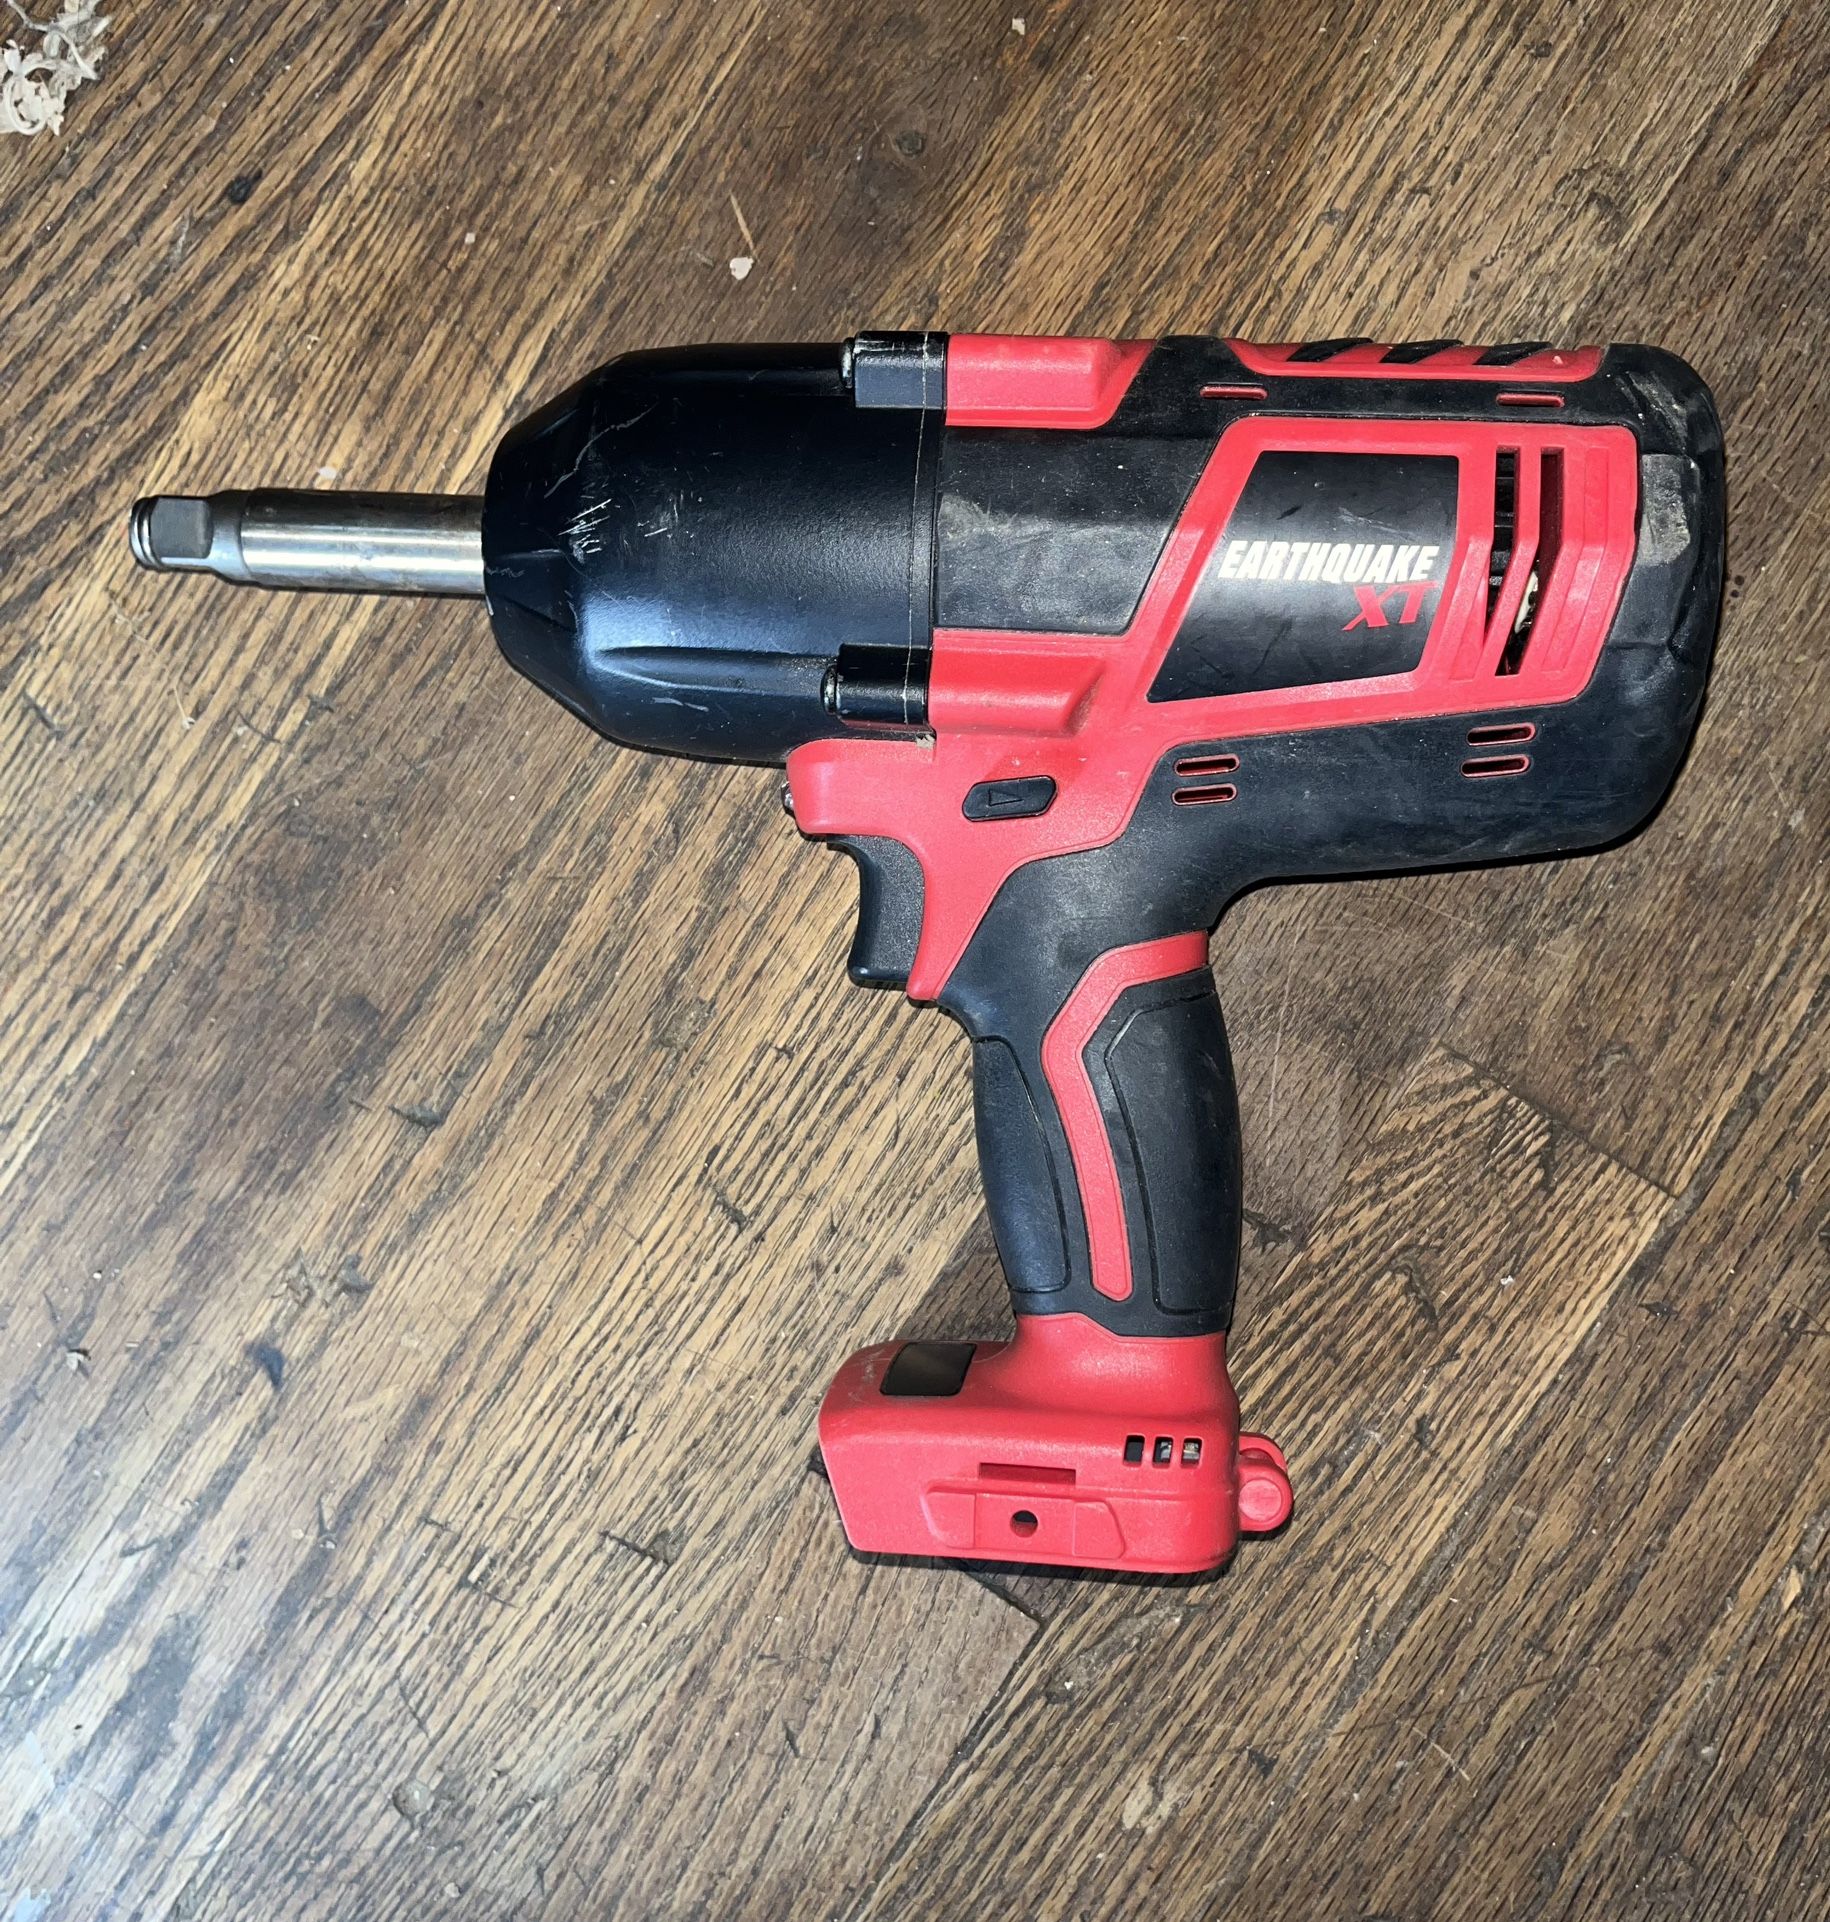 Earthquake 20v 1/2in Impact Wrench